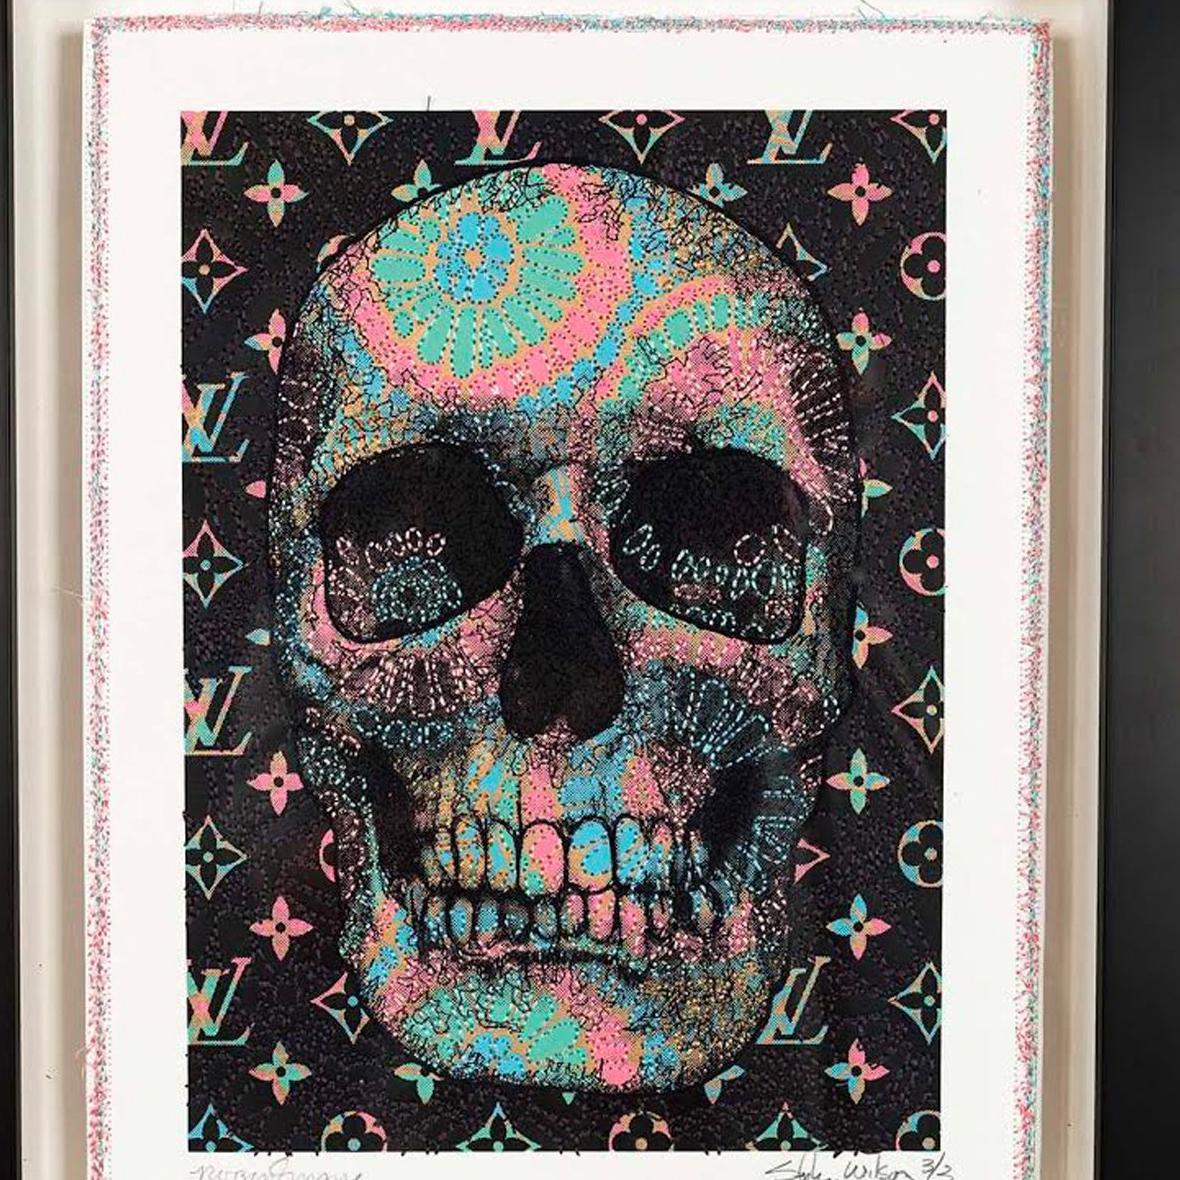 Robert Mars/Stephen Wilson Skulls Collaboration 3 is a pink, turquoise and black contemporary abstract figurative mixed media piece that measures 12 x 9 and is priced at $2,100.


Born and raised in Hoboken, New Jersey, Stephen Wilson is a